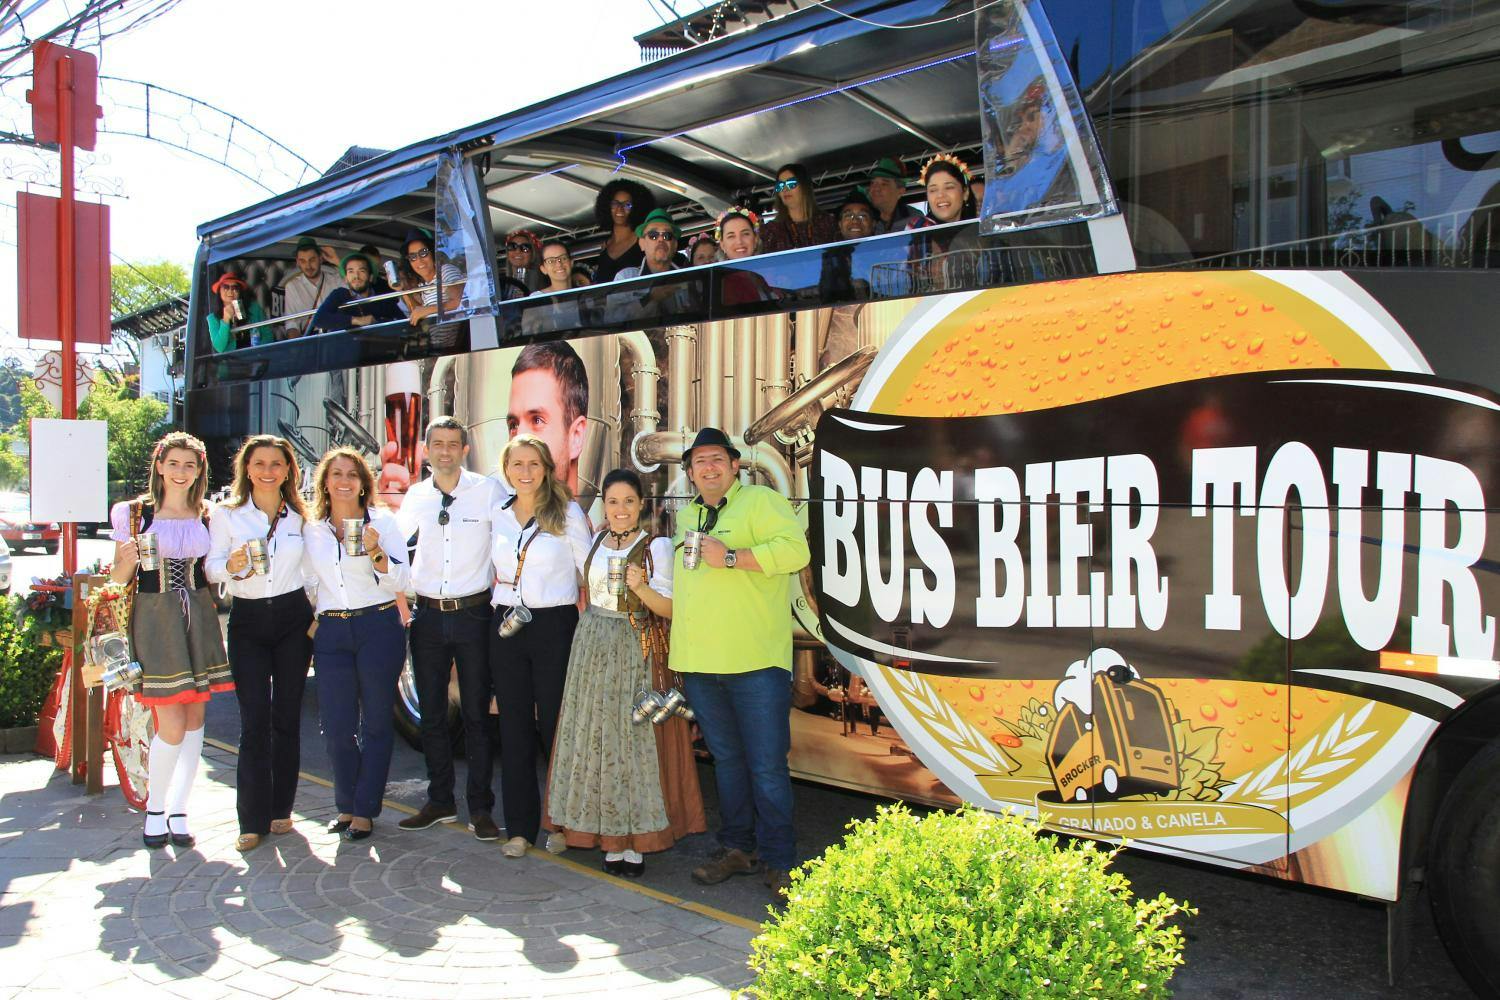 Bus beer tour with tasting